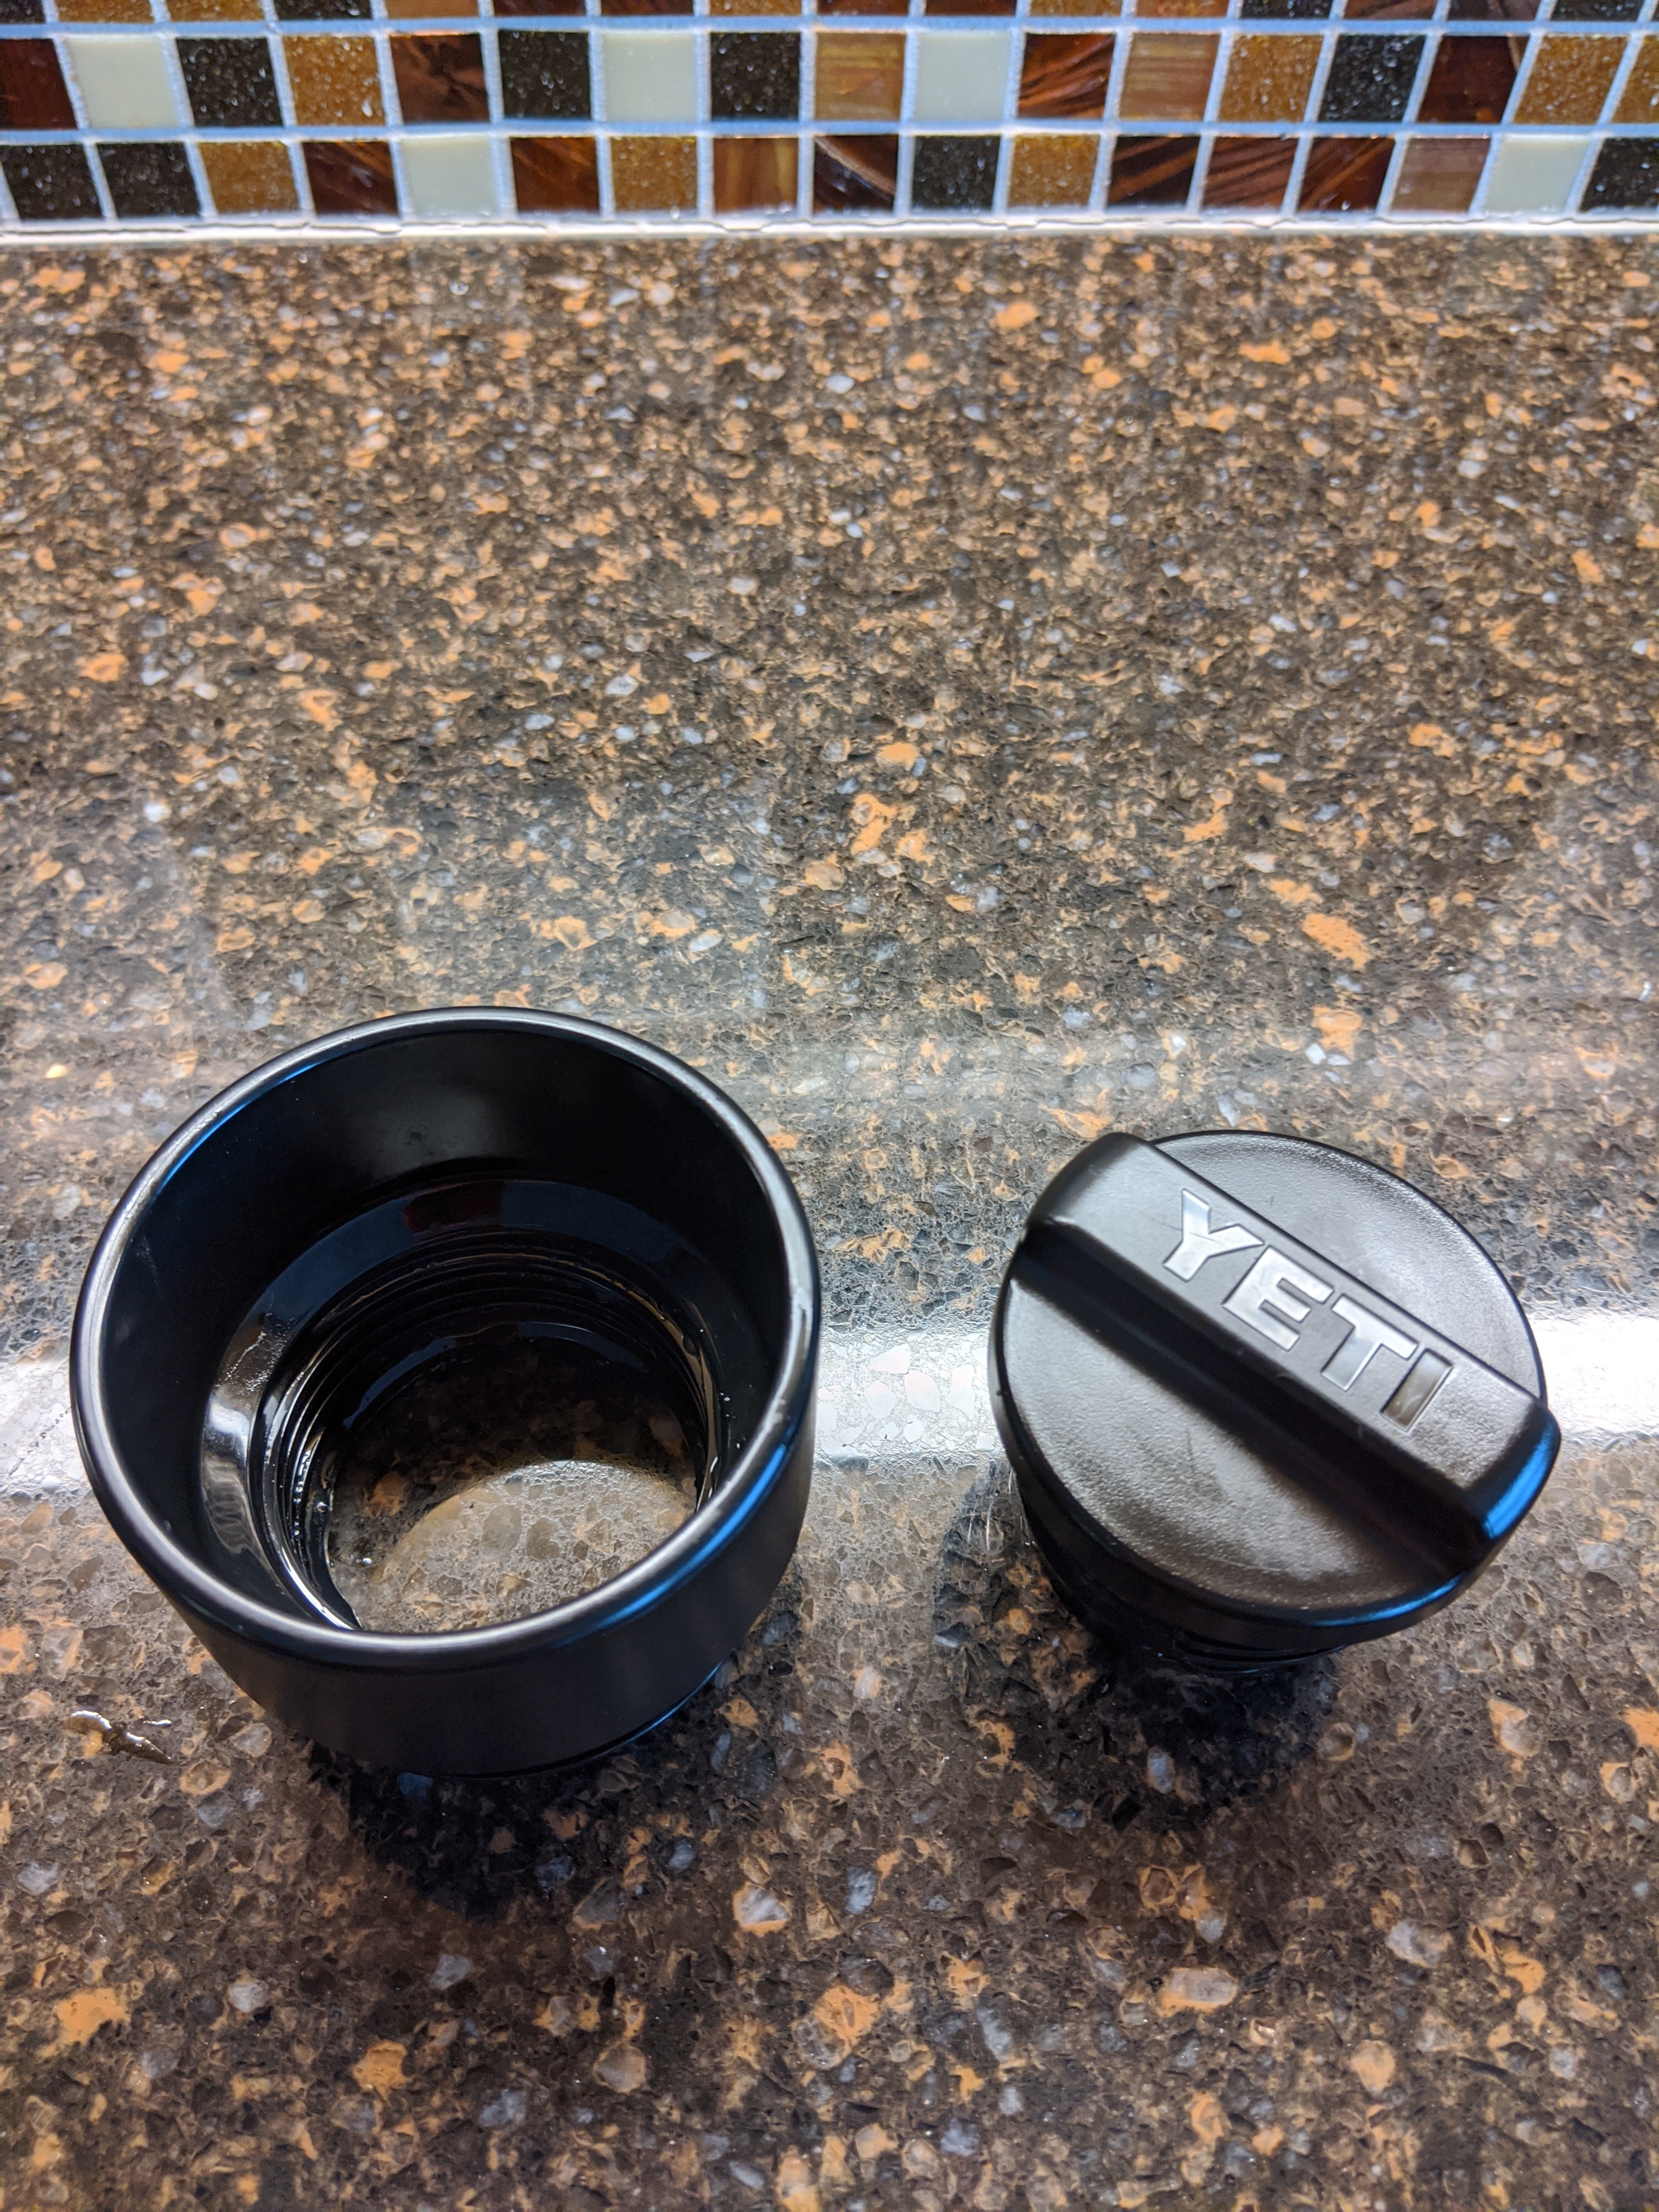 How to Take Apart the Yeti Hotshot Lid Cap for Cleaning 